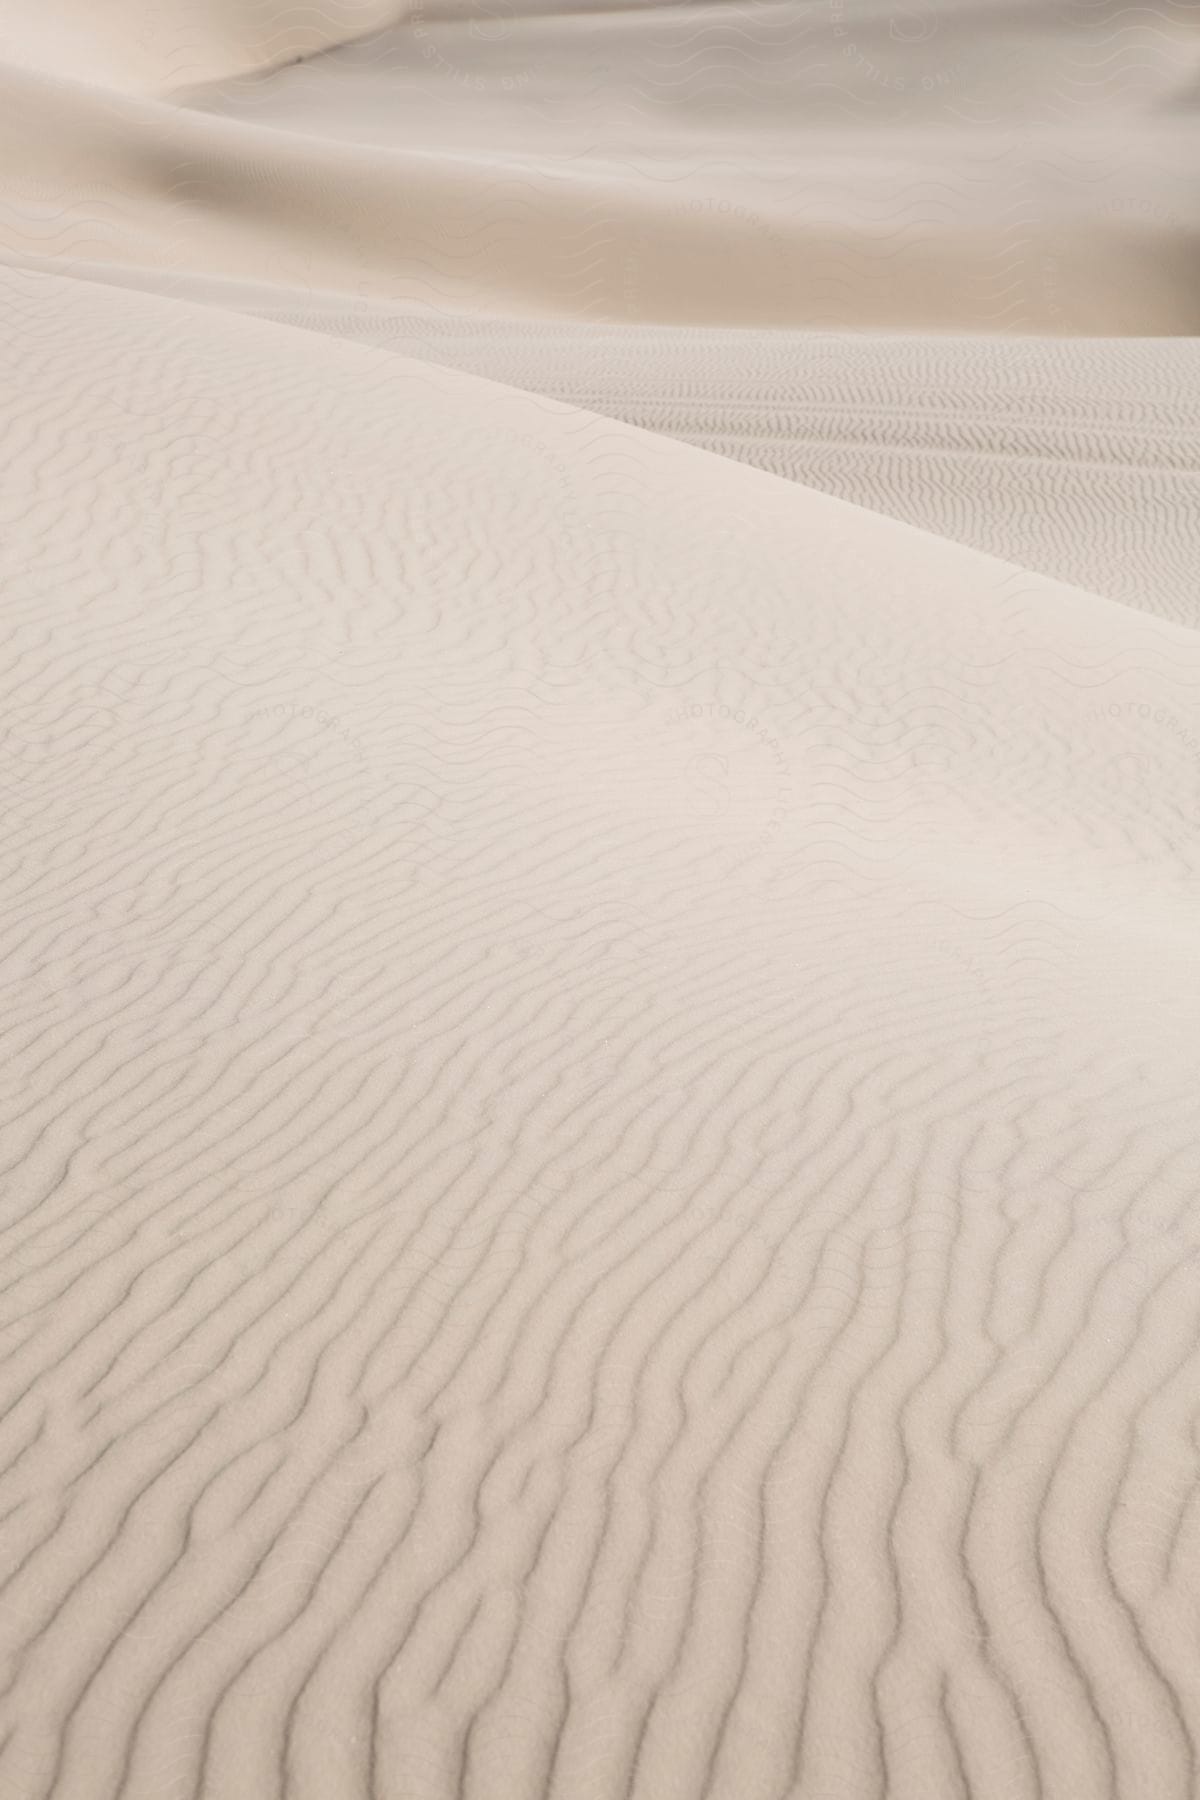 Details in lines on the white sands of the desert.